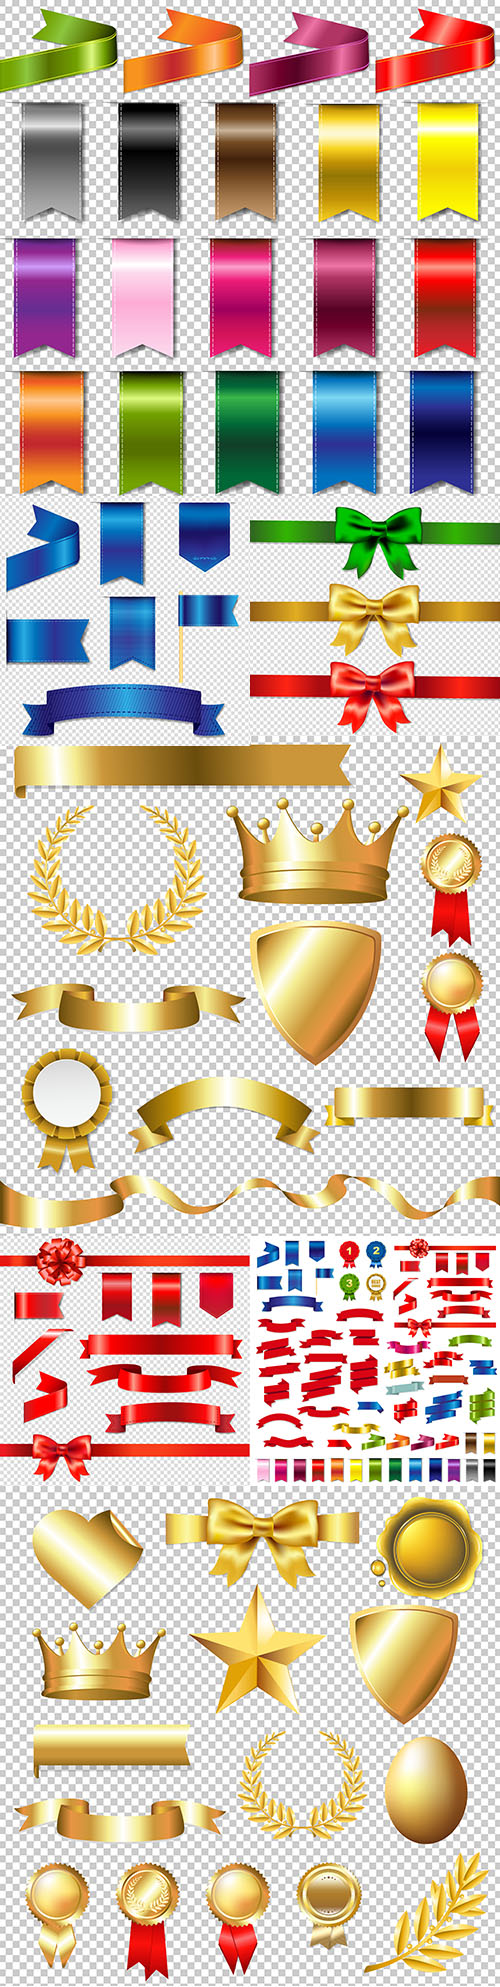 Bright ribbon and gold signs and symbols for design
